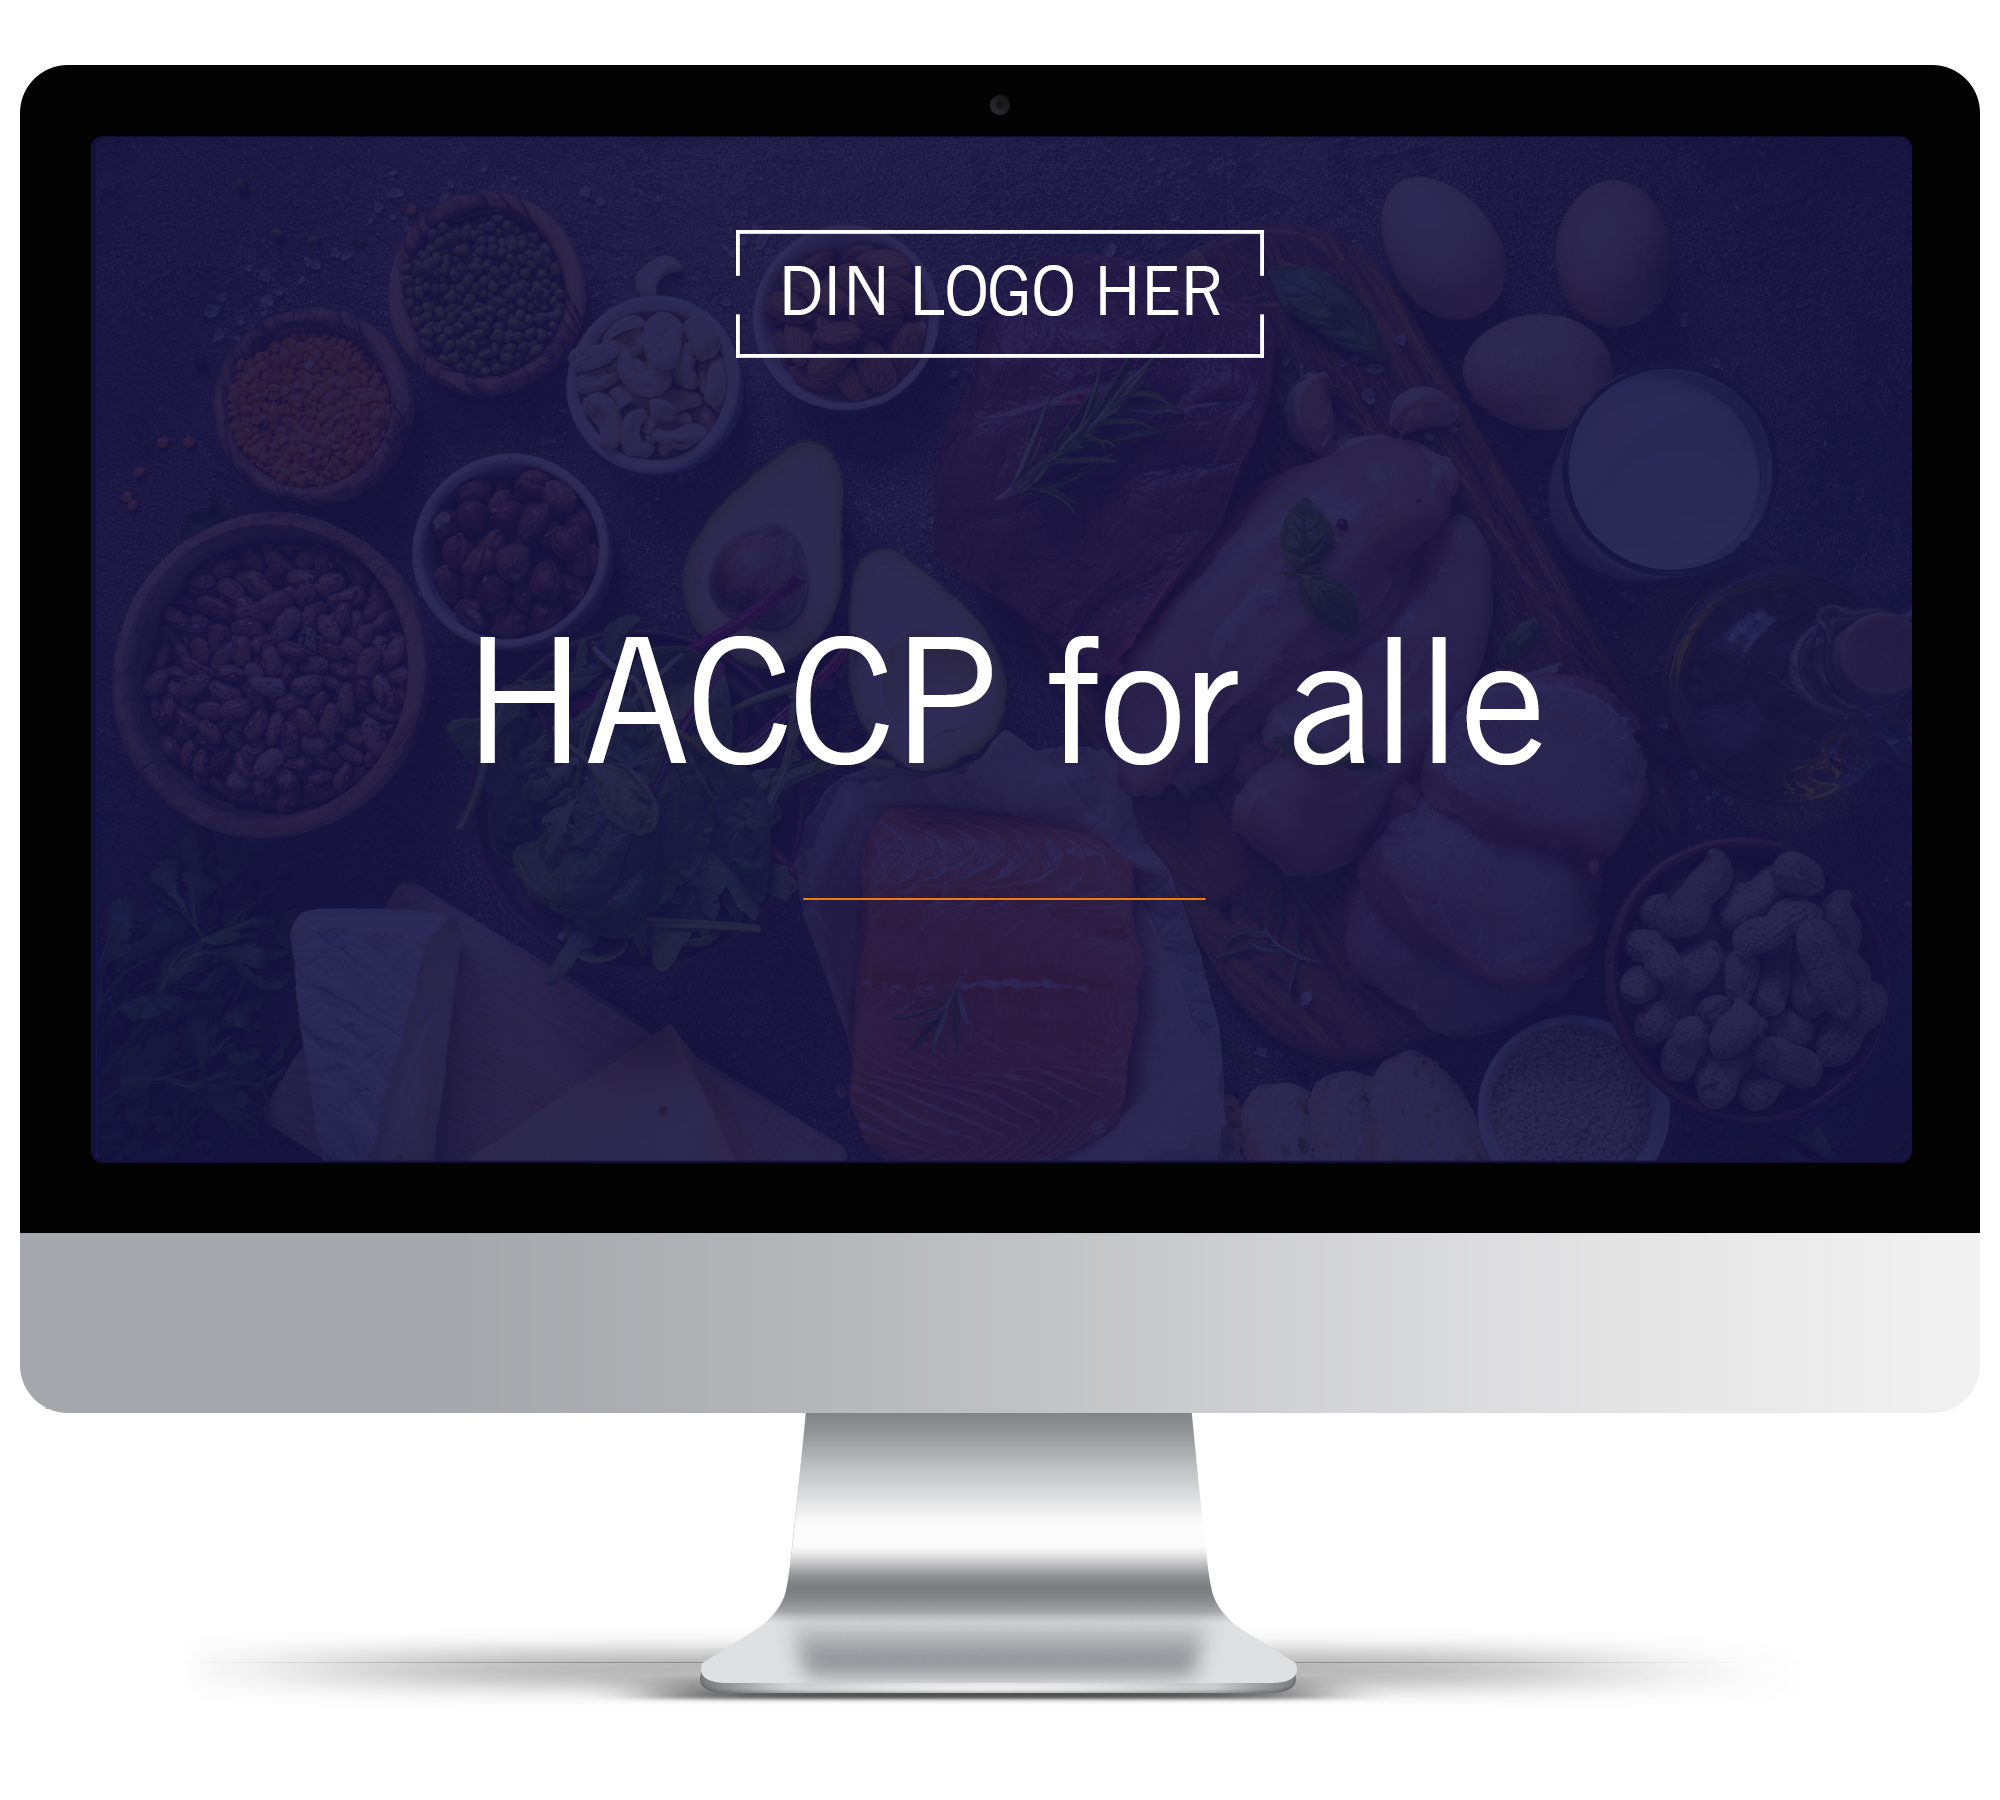 HACCP for alle